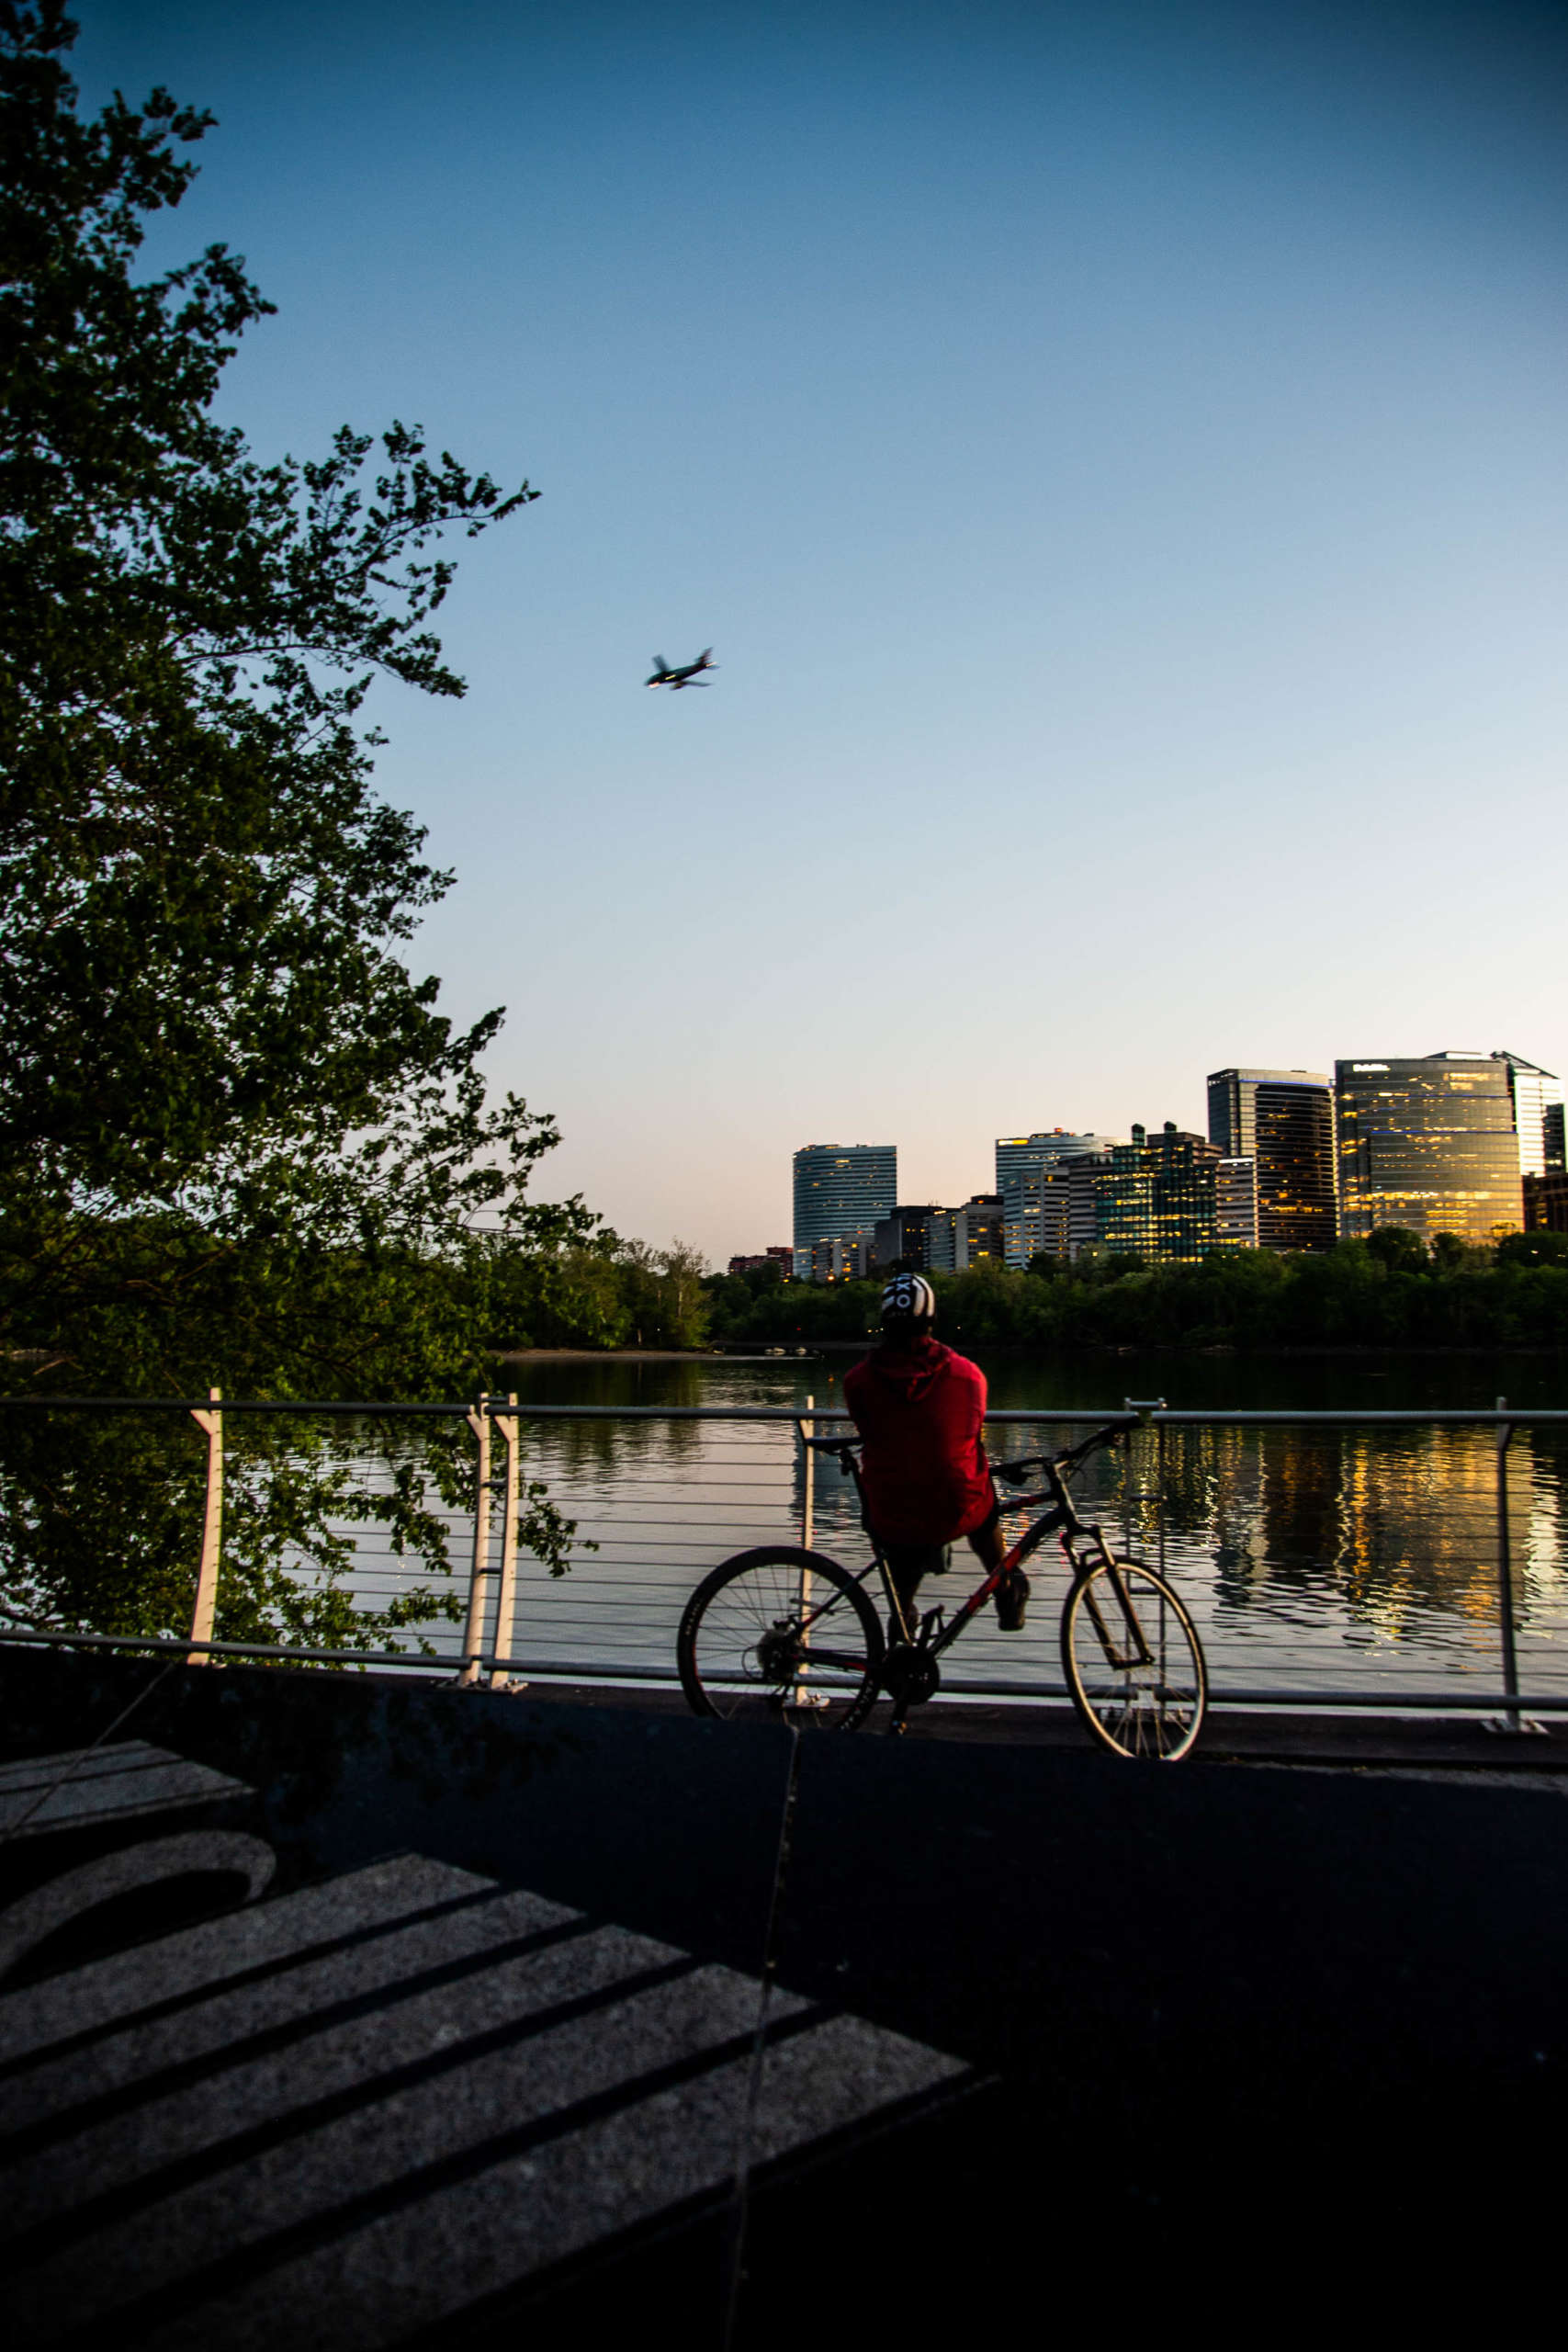 A cyclist pauses by a guard rail above a waterfront as they watch a plane soar overhead. Across the water is a city skyline, lit up in the gold of evening sunlight.